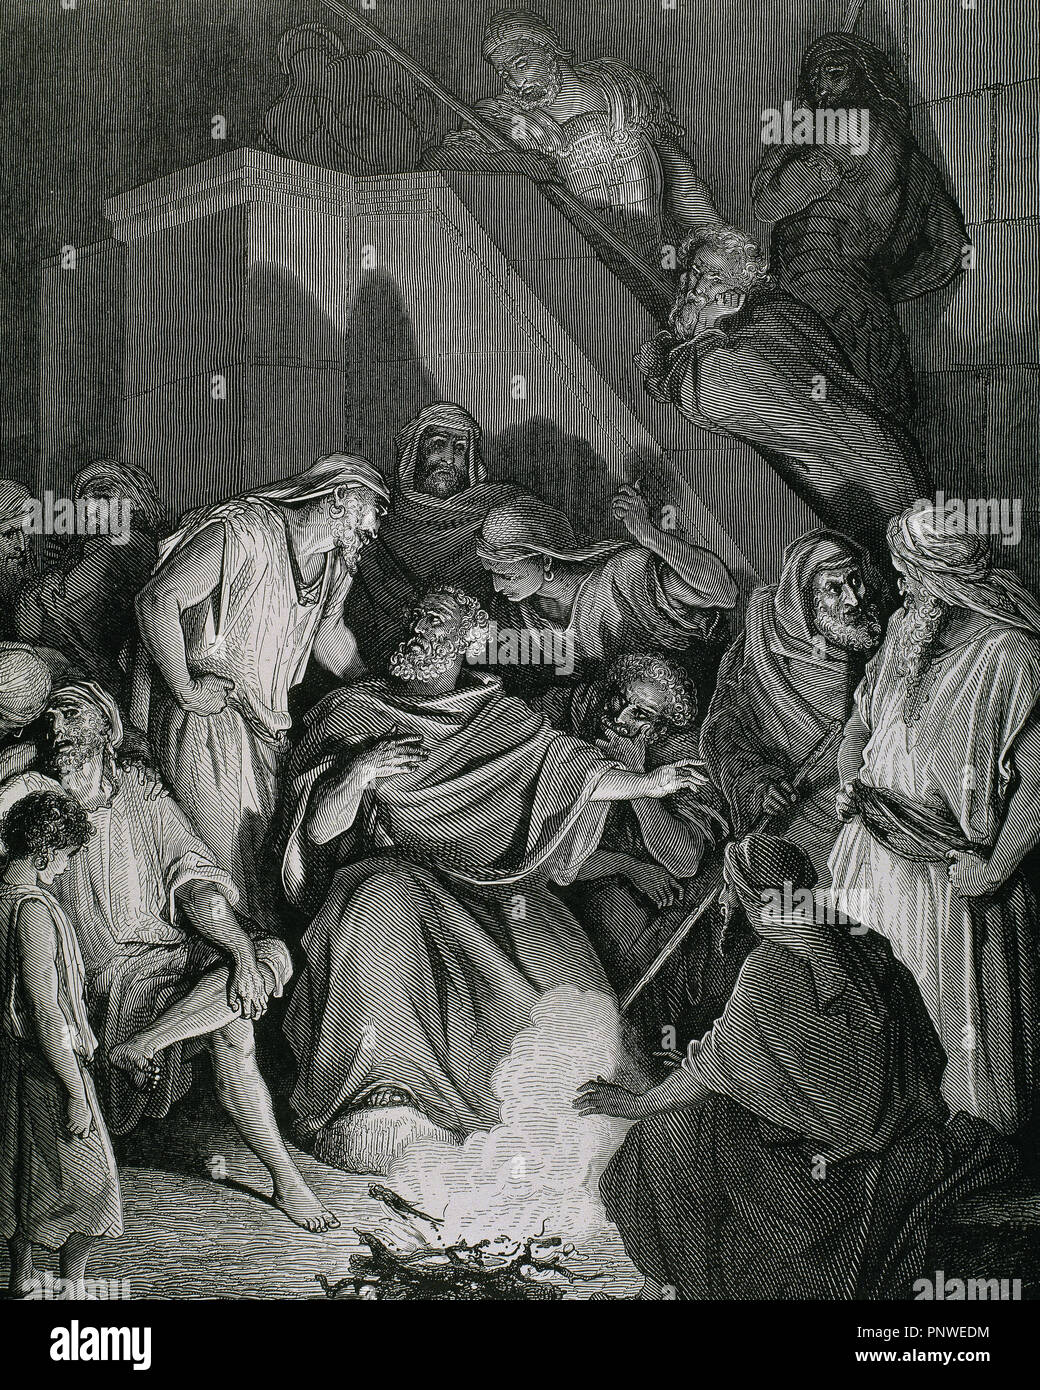 Saint. Peter (c. 1 B.C.-67 A.C). Apostle of Jesus Christ and first Pope of the Catholic Church. St. Peter's denials. (Matthew, Chapter XXVI, Verses 69 to 75). G. Dore drawing and engraving by Pannemaker. Stock Photo